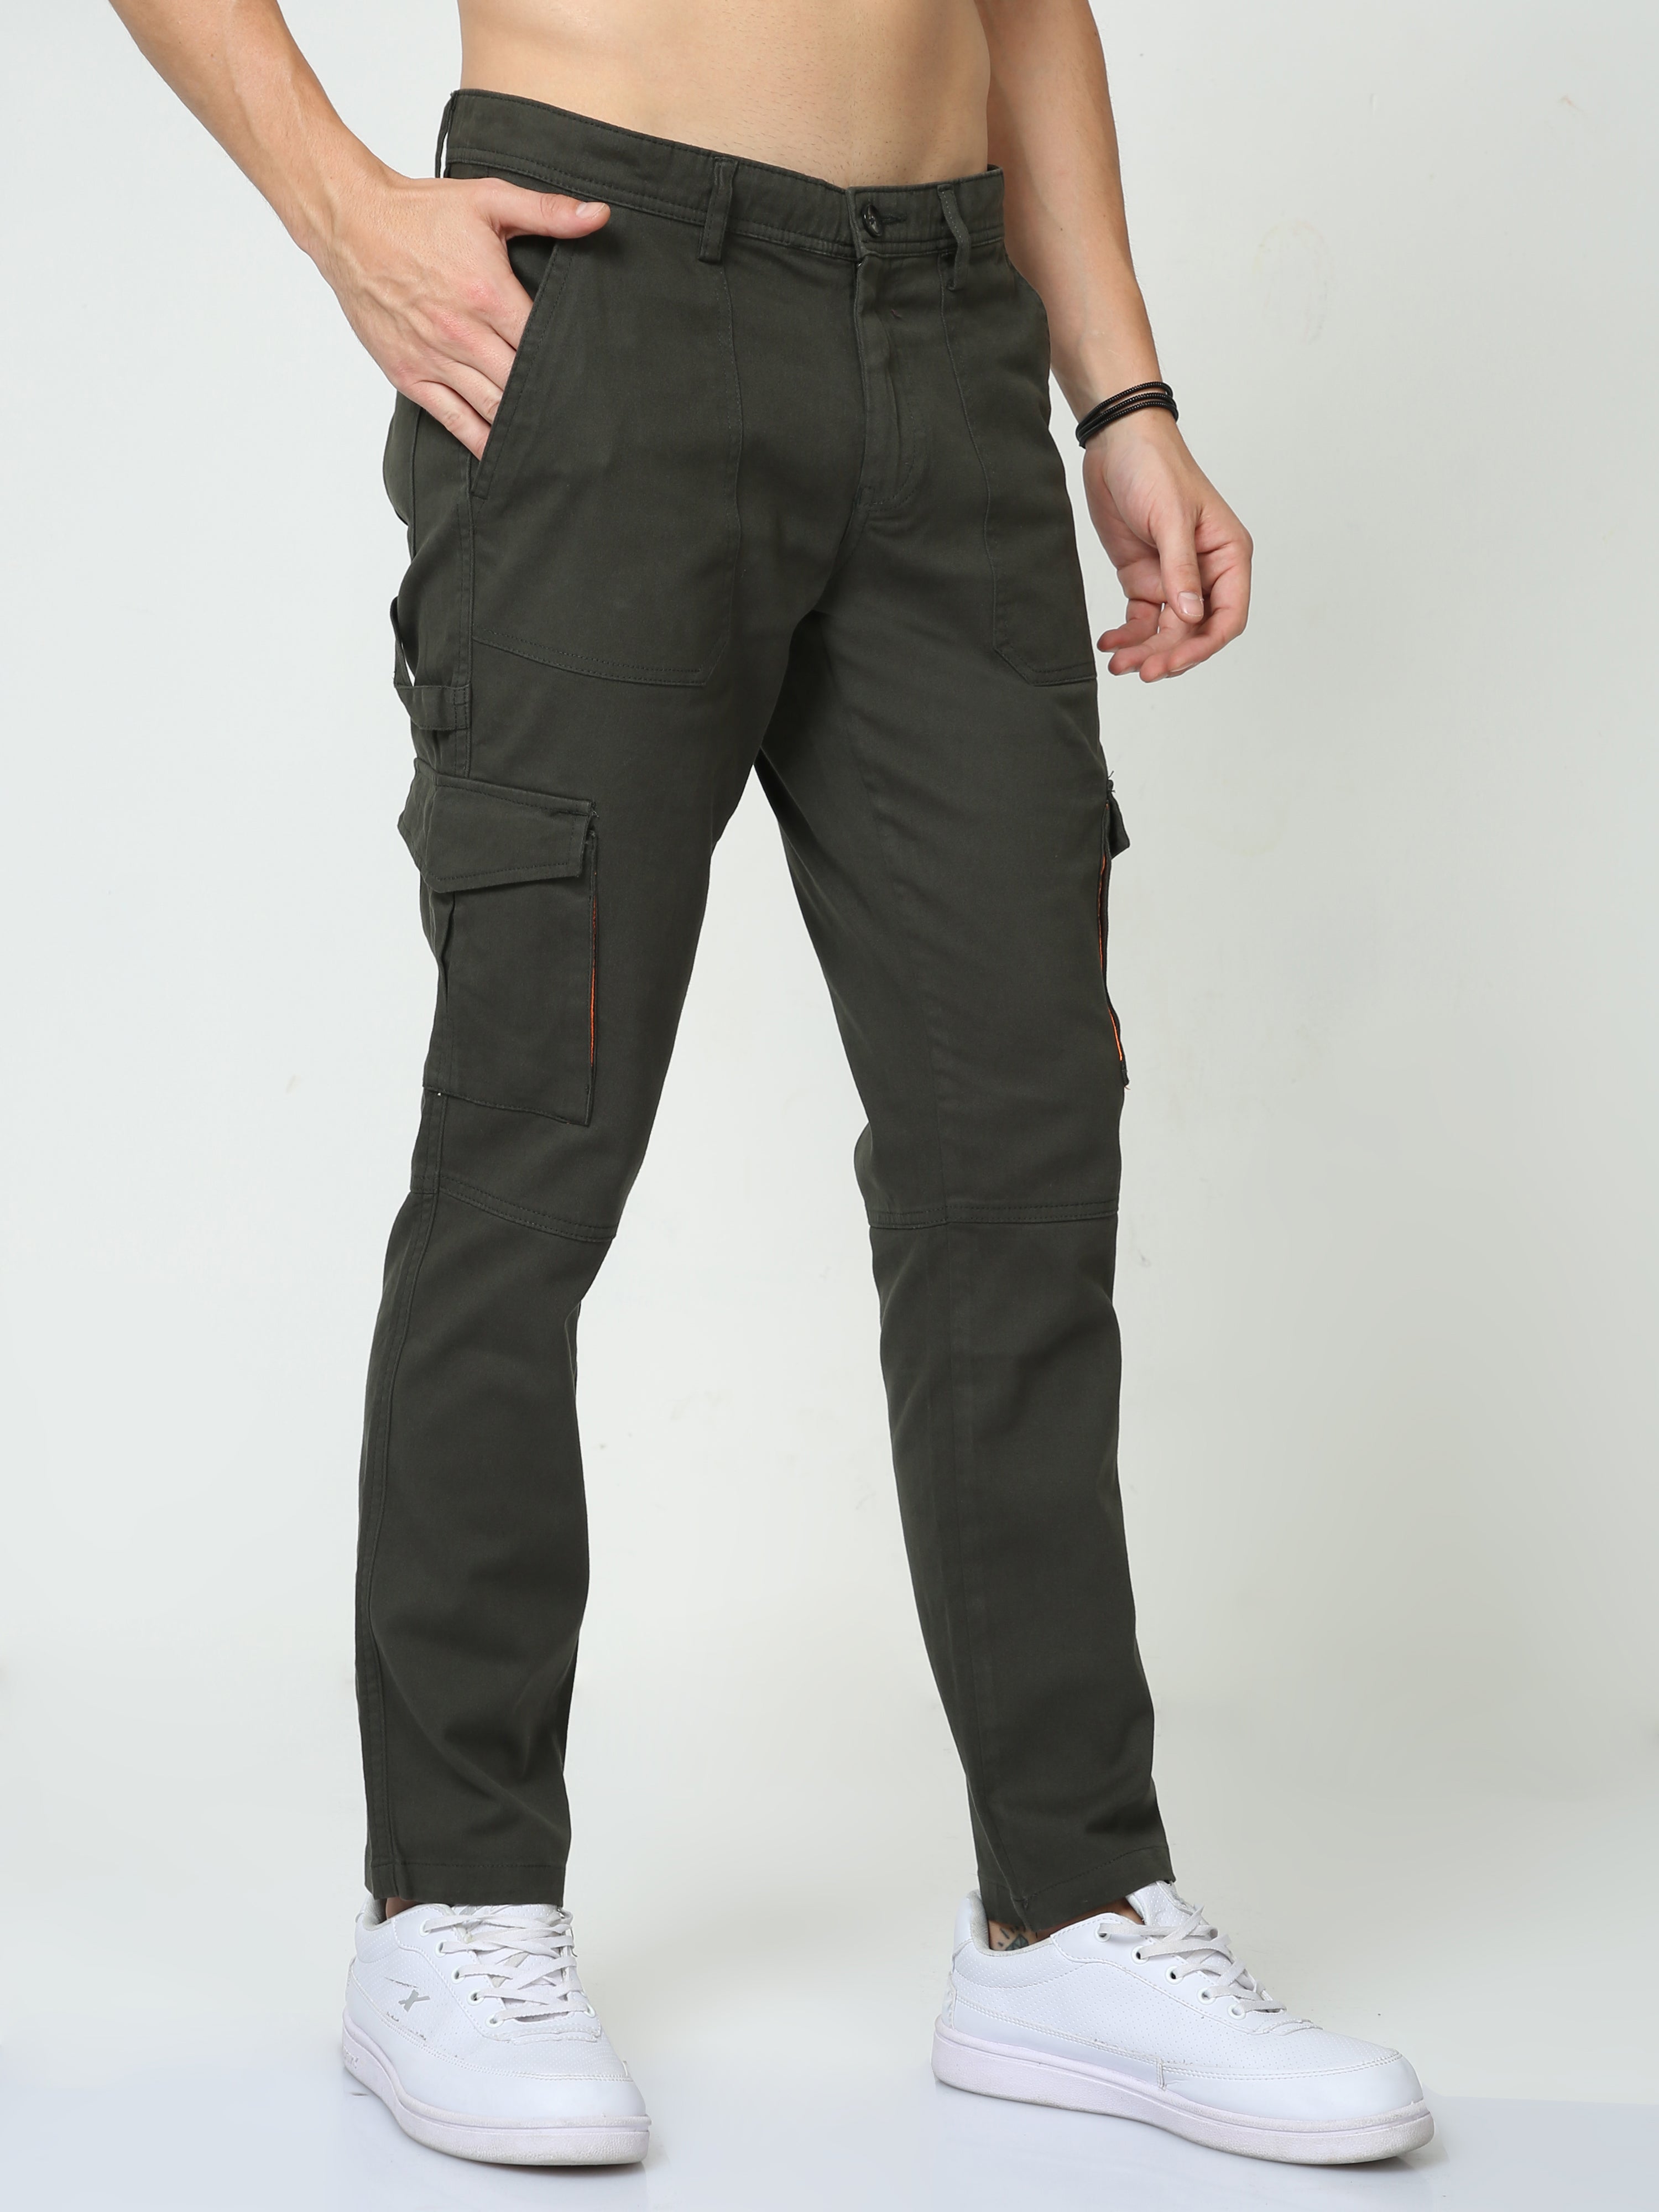 Buy Men's Readymade Luxury Trousers Online in India @ Tailorman